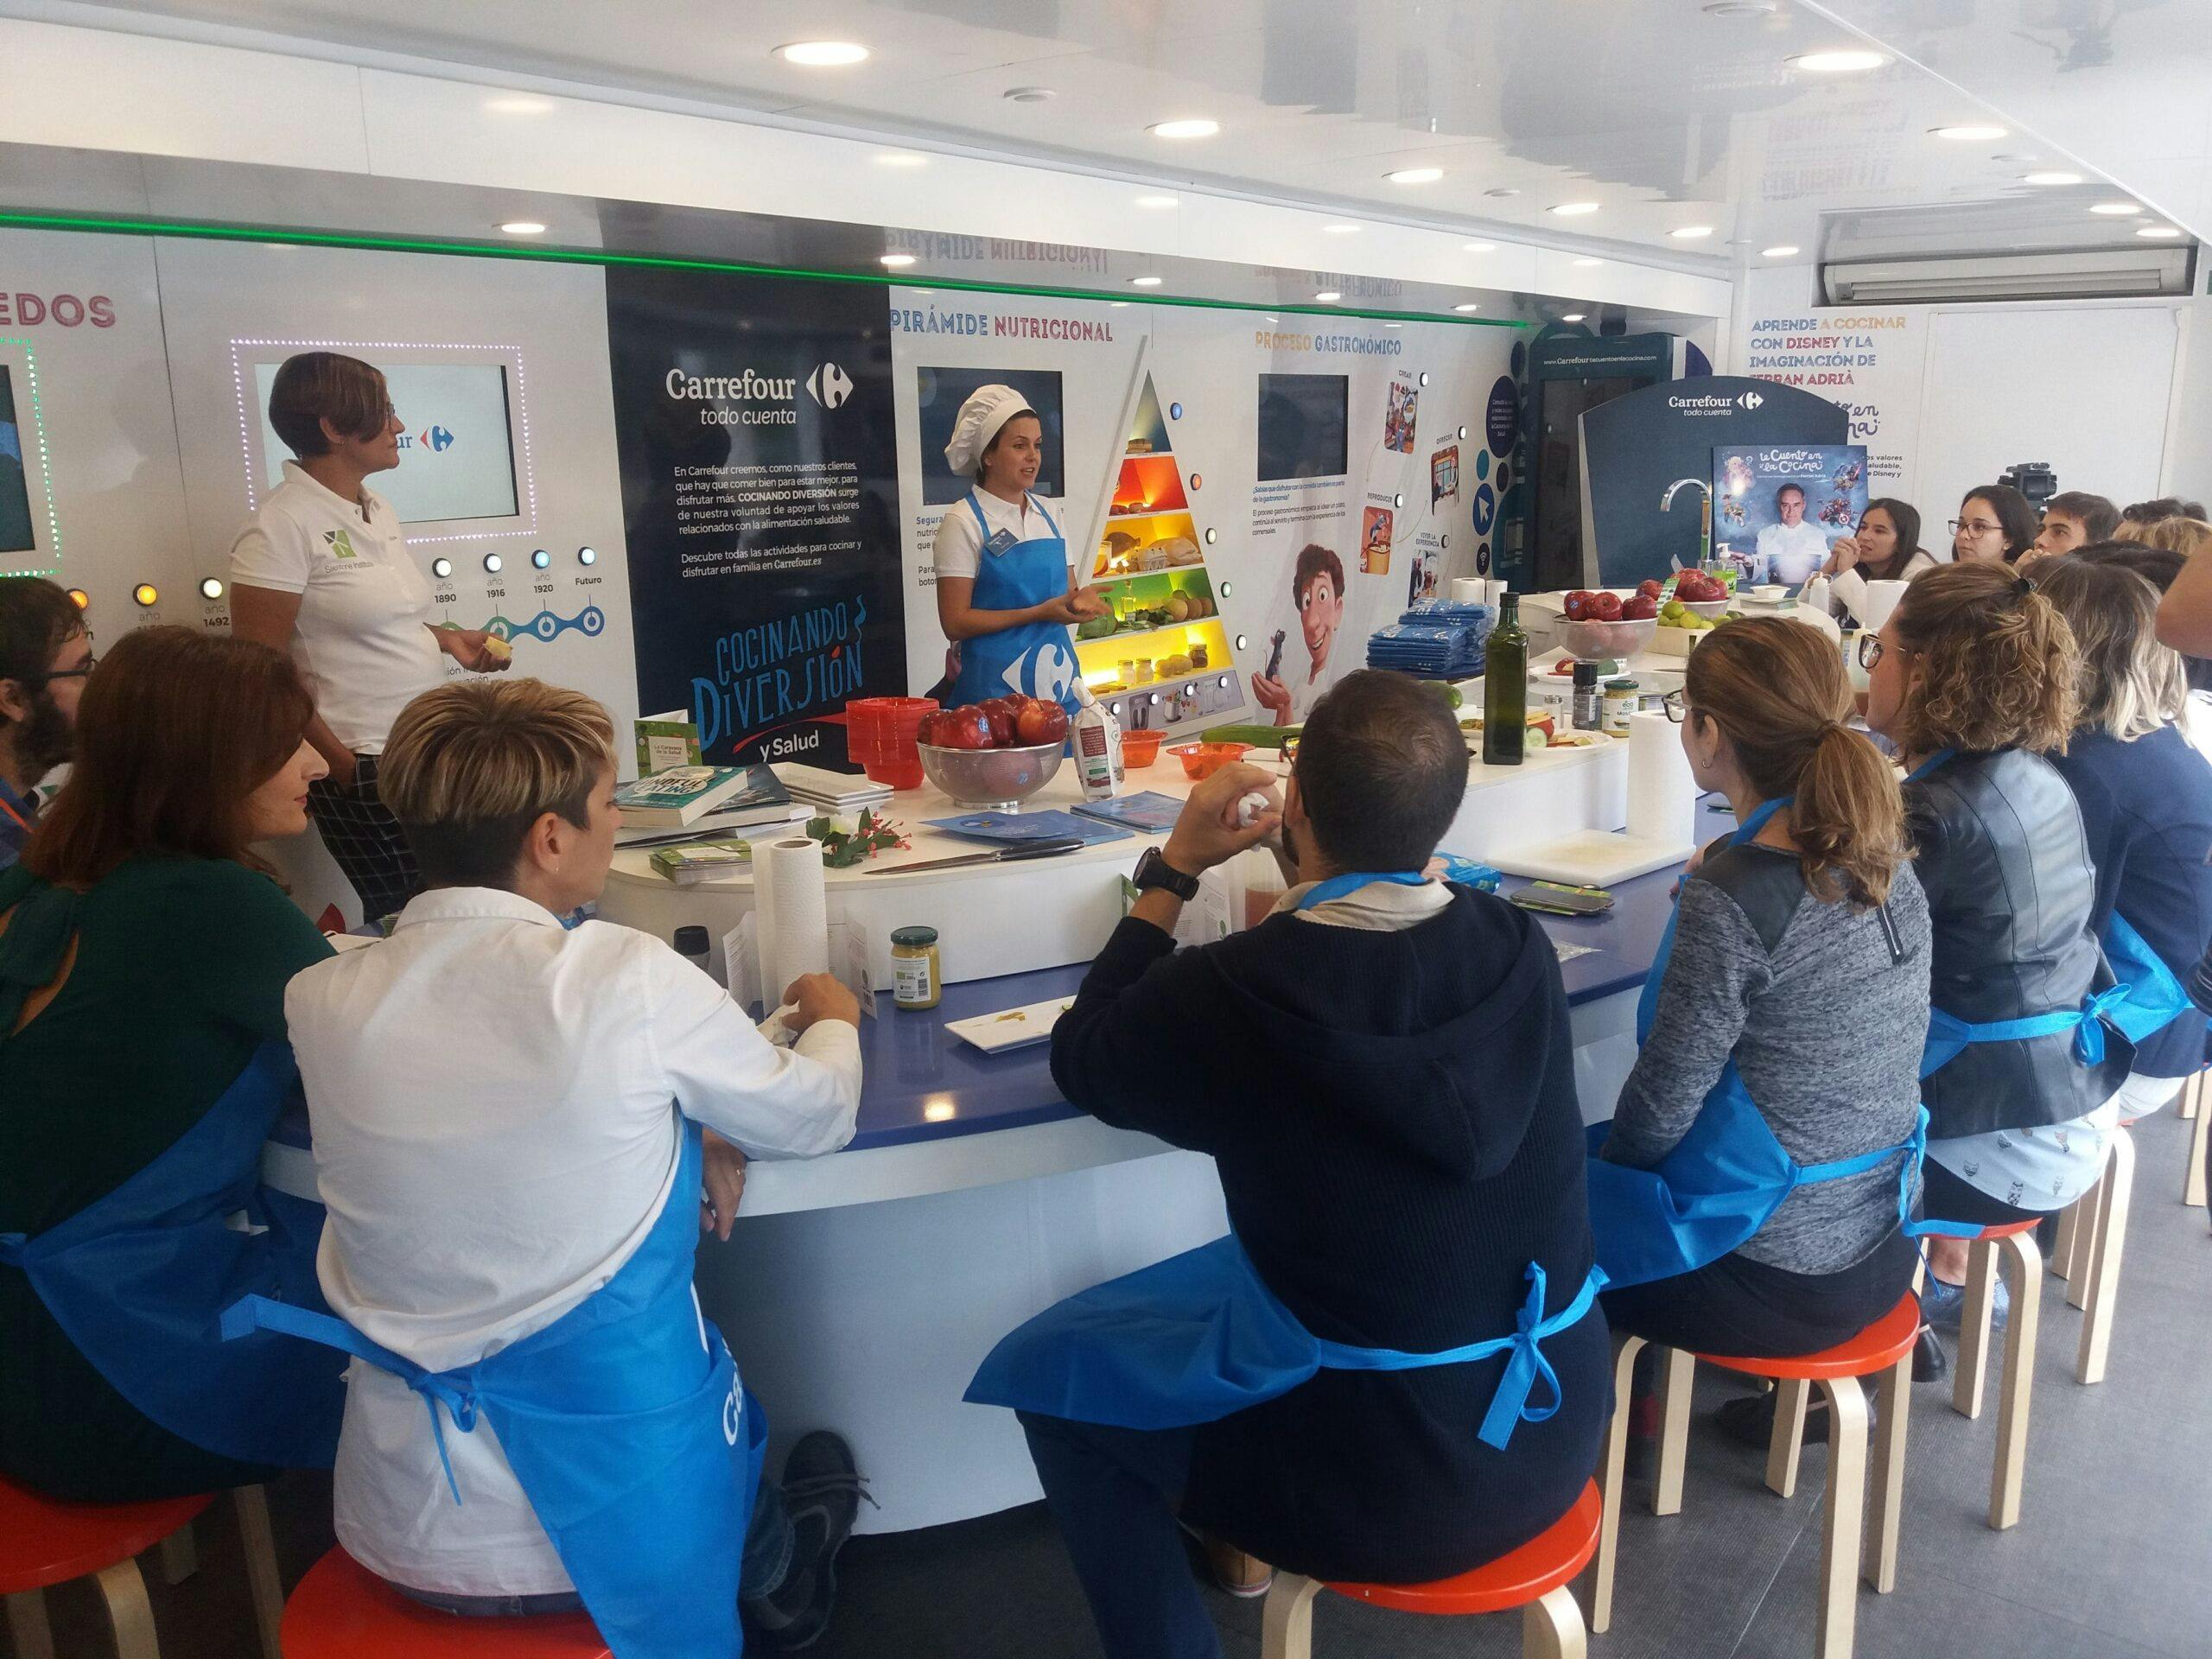 Image 32 of InstitutoSilestone CaravanadelaSalud en Cosentino 5 1 1 scaled in Cosentino promotes good nutrition and food safety - Cosentino